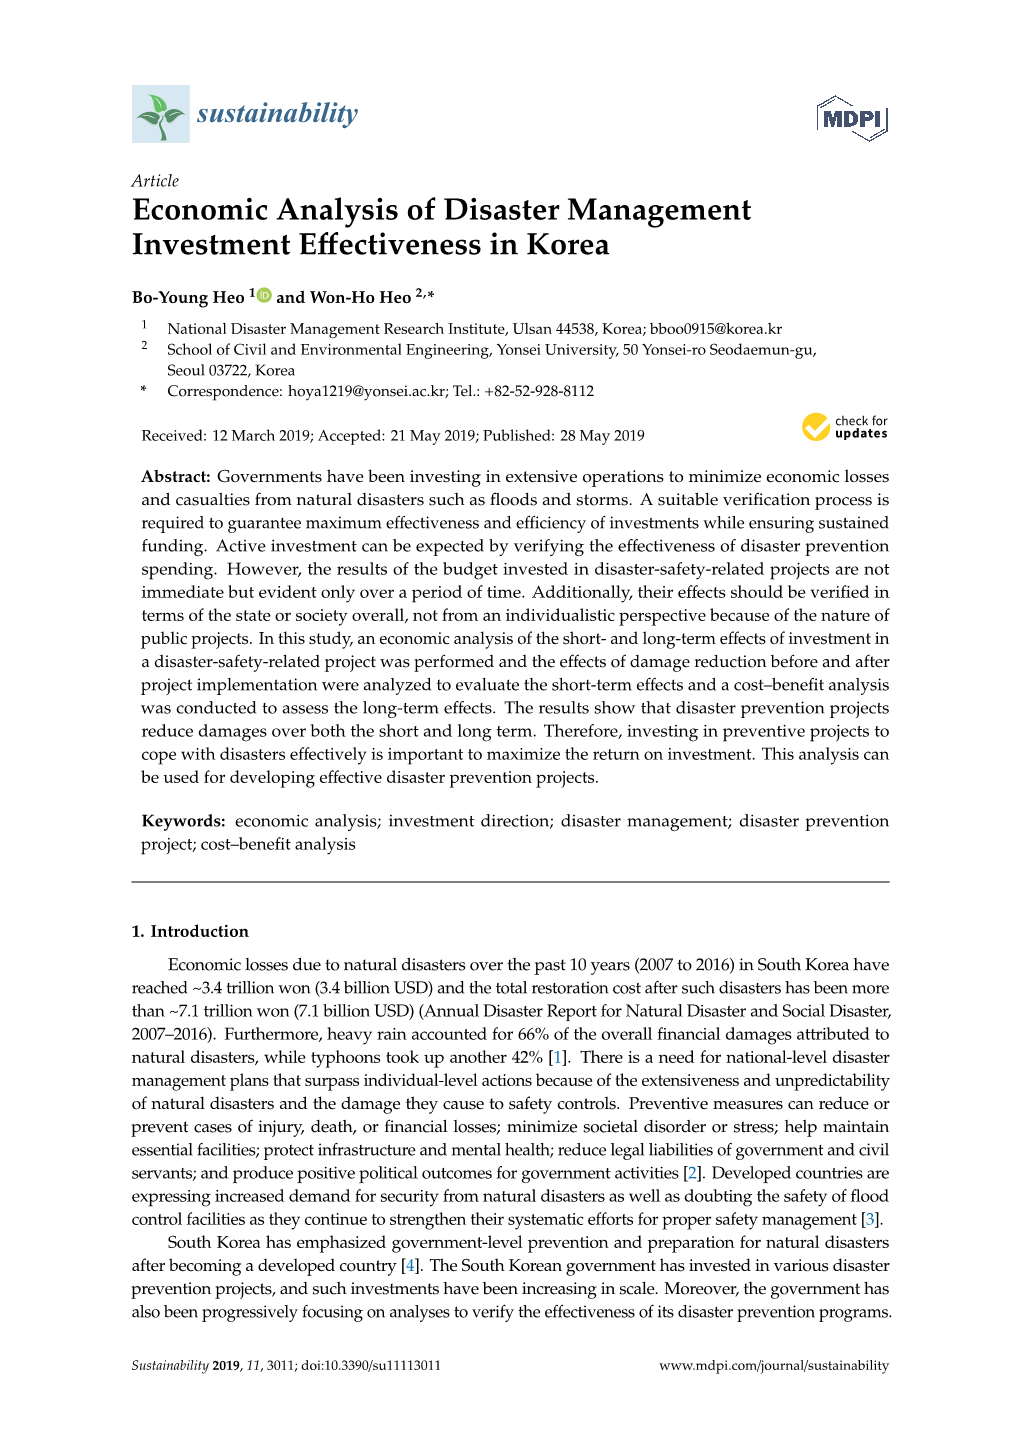 Economic Analysis of Disaster Management Investment Eﬀectiveness in Korea